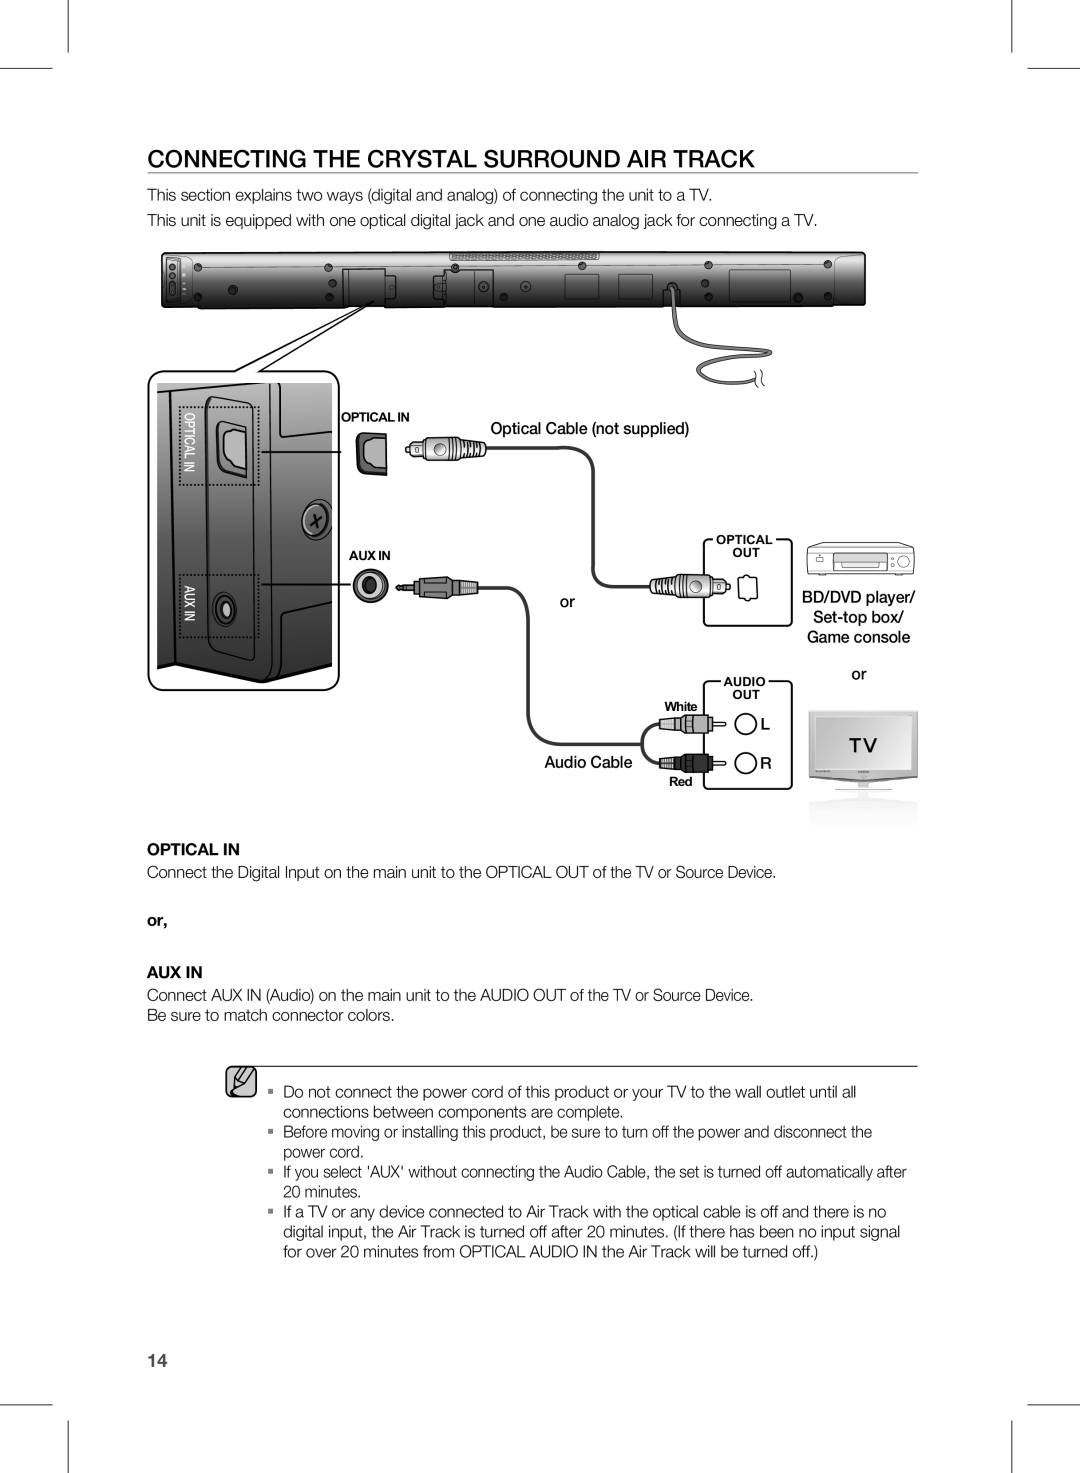 Samsung HW-E450 user manual connecting the CRYSTAL SURROUND AIR TRACK, Optical In, Audio Cable, or AUX IN 